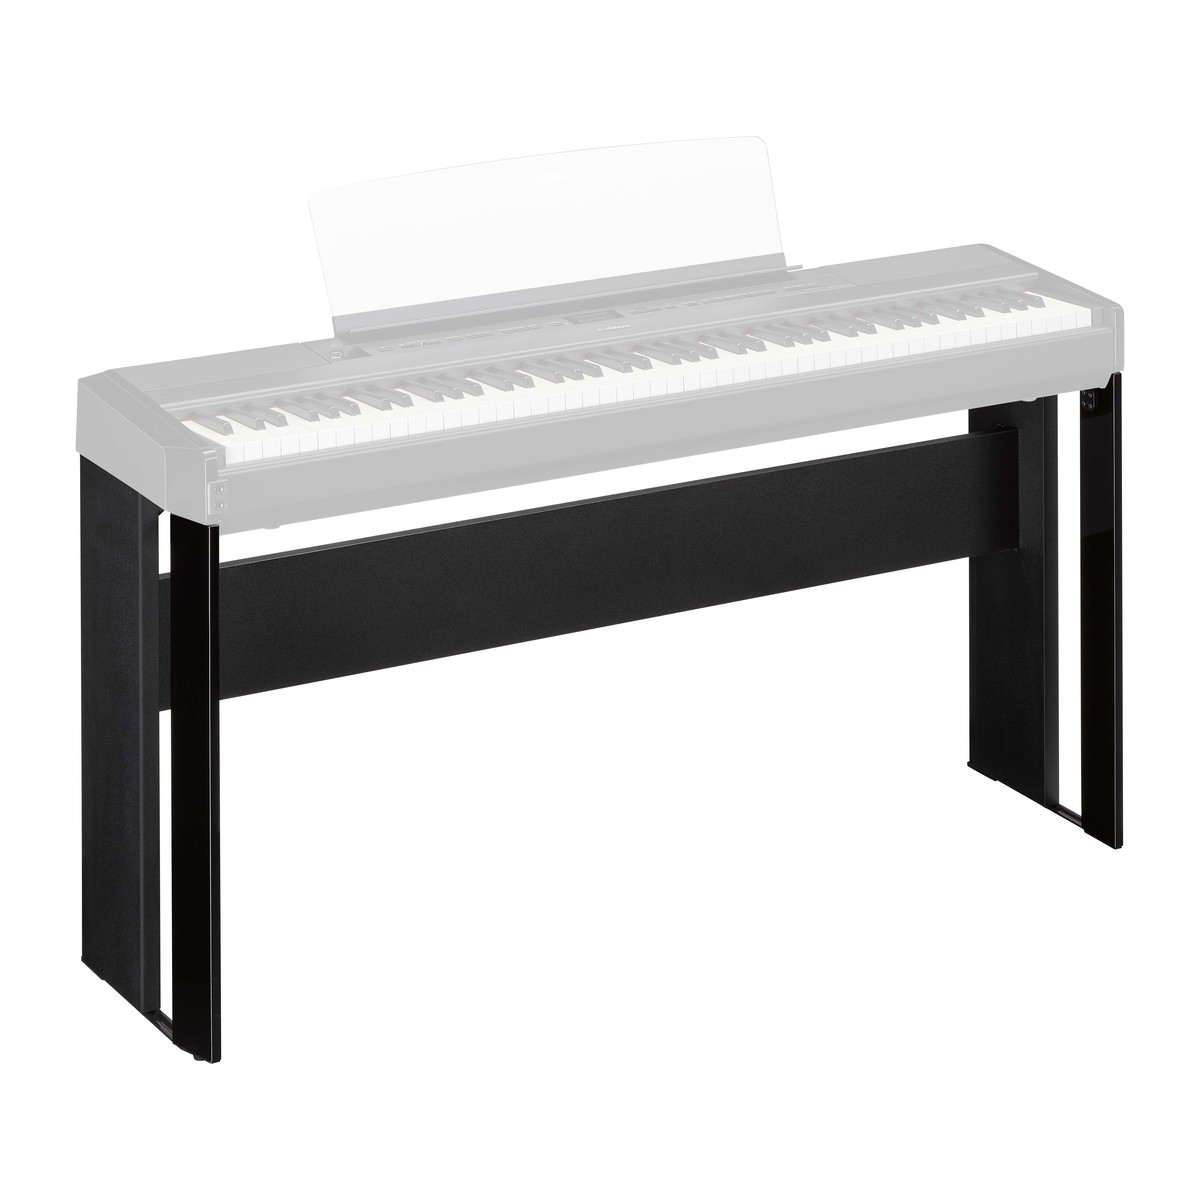 An image of Yamaha L-515 Stand for P-515 Piano Black